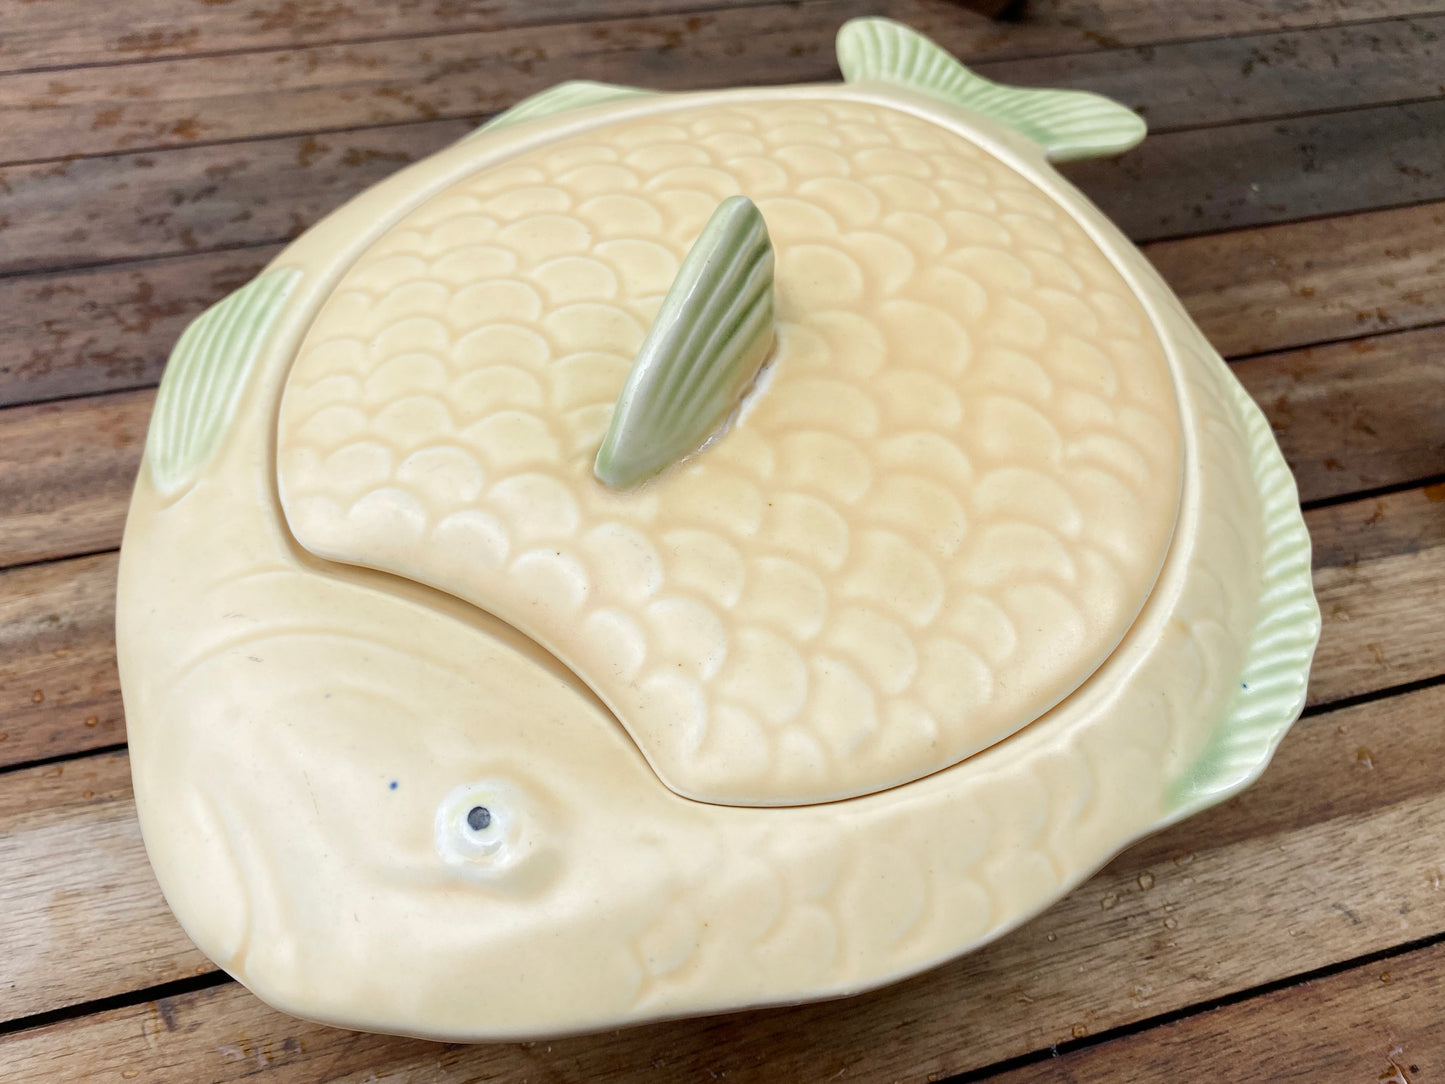 c1920s Shorter & Son Large Art Deco Fish Tureen Designed by Clarice Cliff